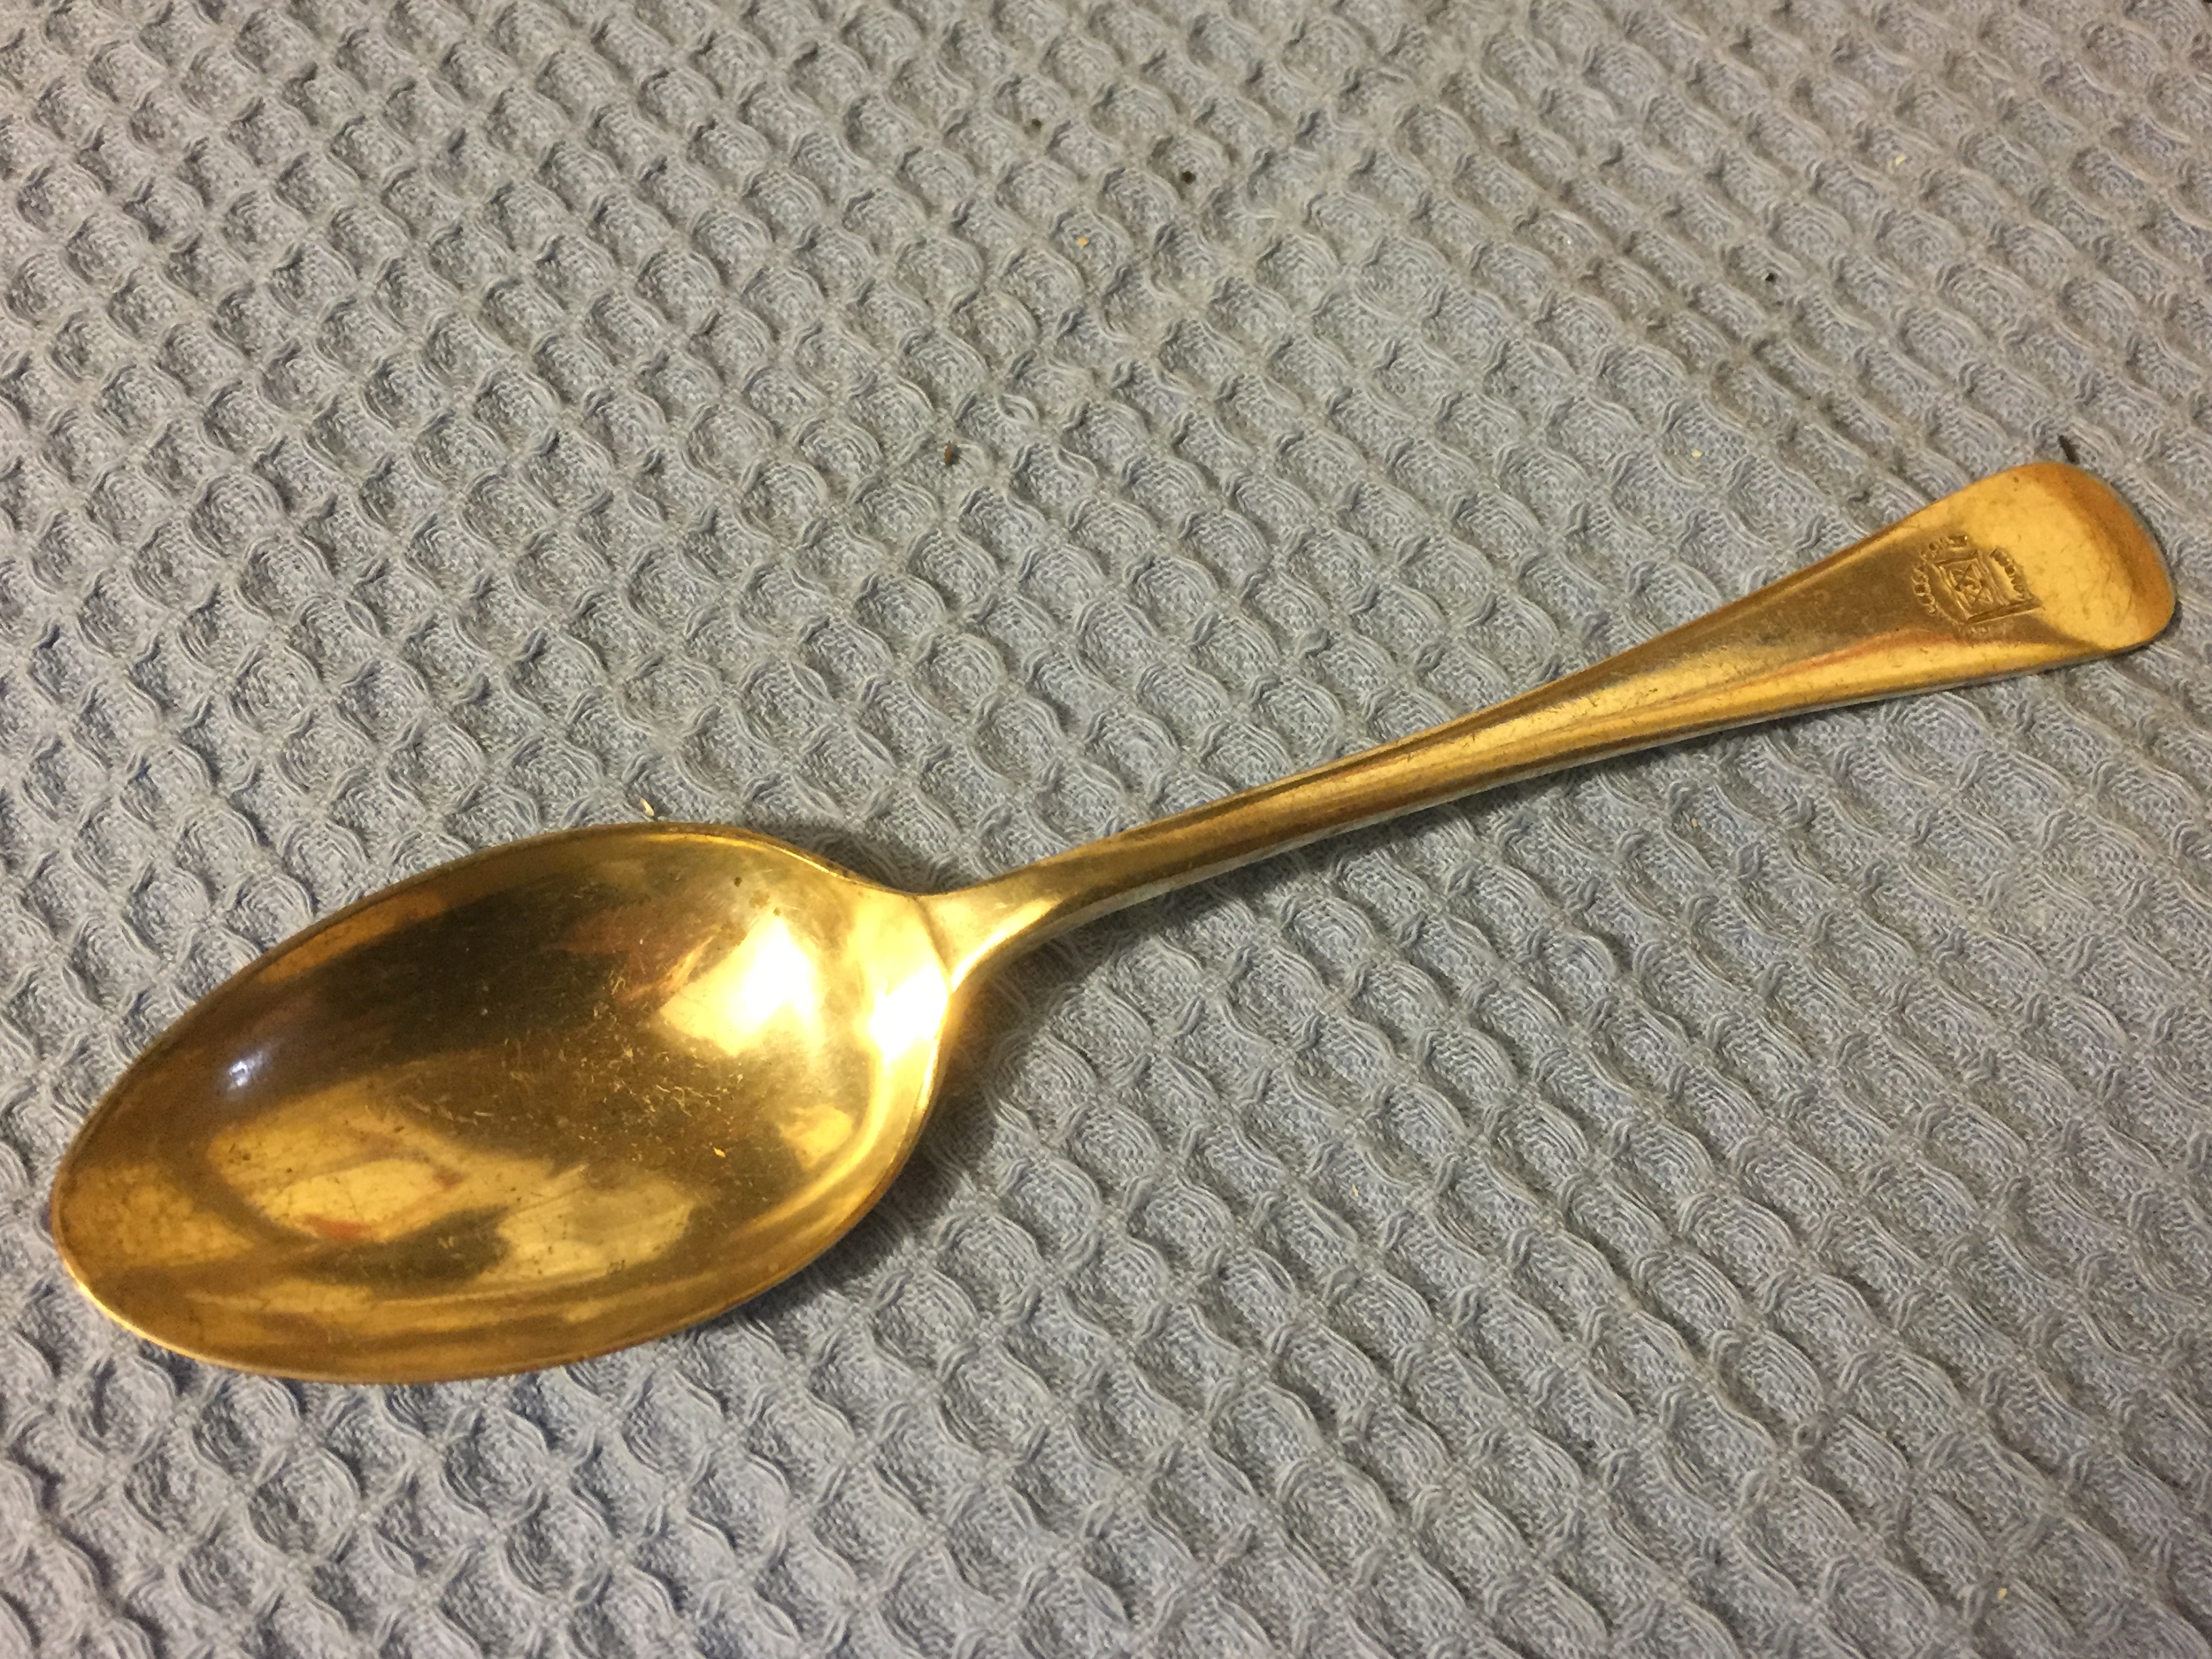 AS USED ON BOARD TEA SPOON FROM THE ROTTERDAM LLOYD SHIPPING LINE